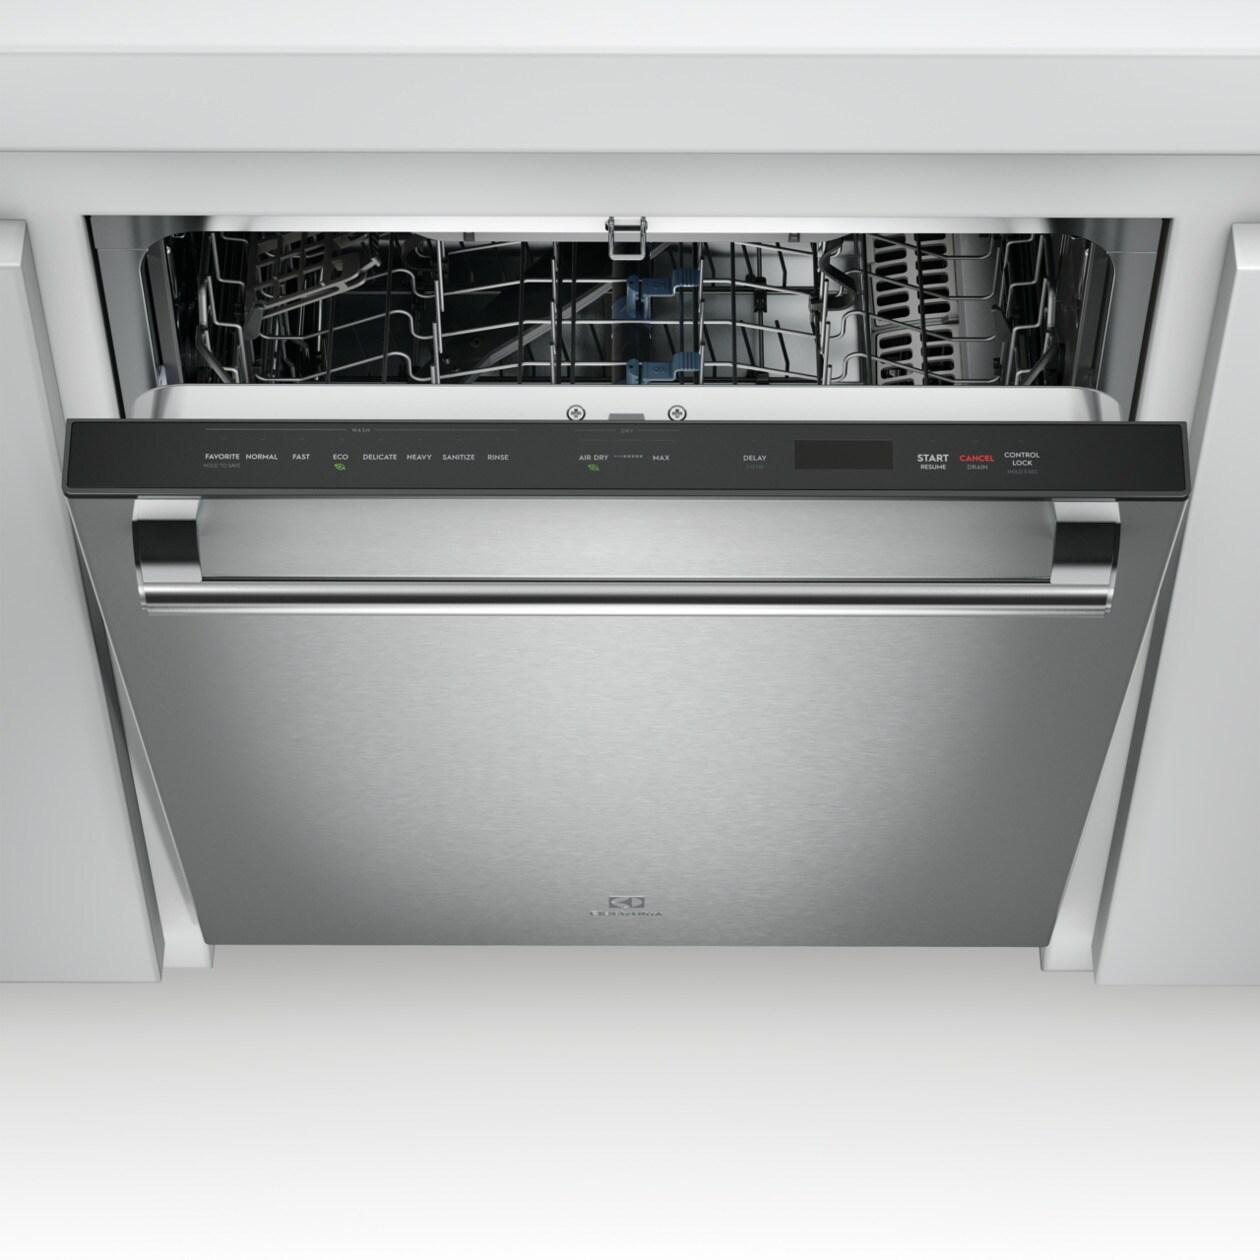 Electrolux EDSH4944BS Electrolux 24" Stainless Steel Tub Built-In Dishwasher With Smartboost&#8482;